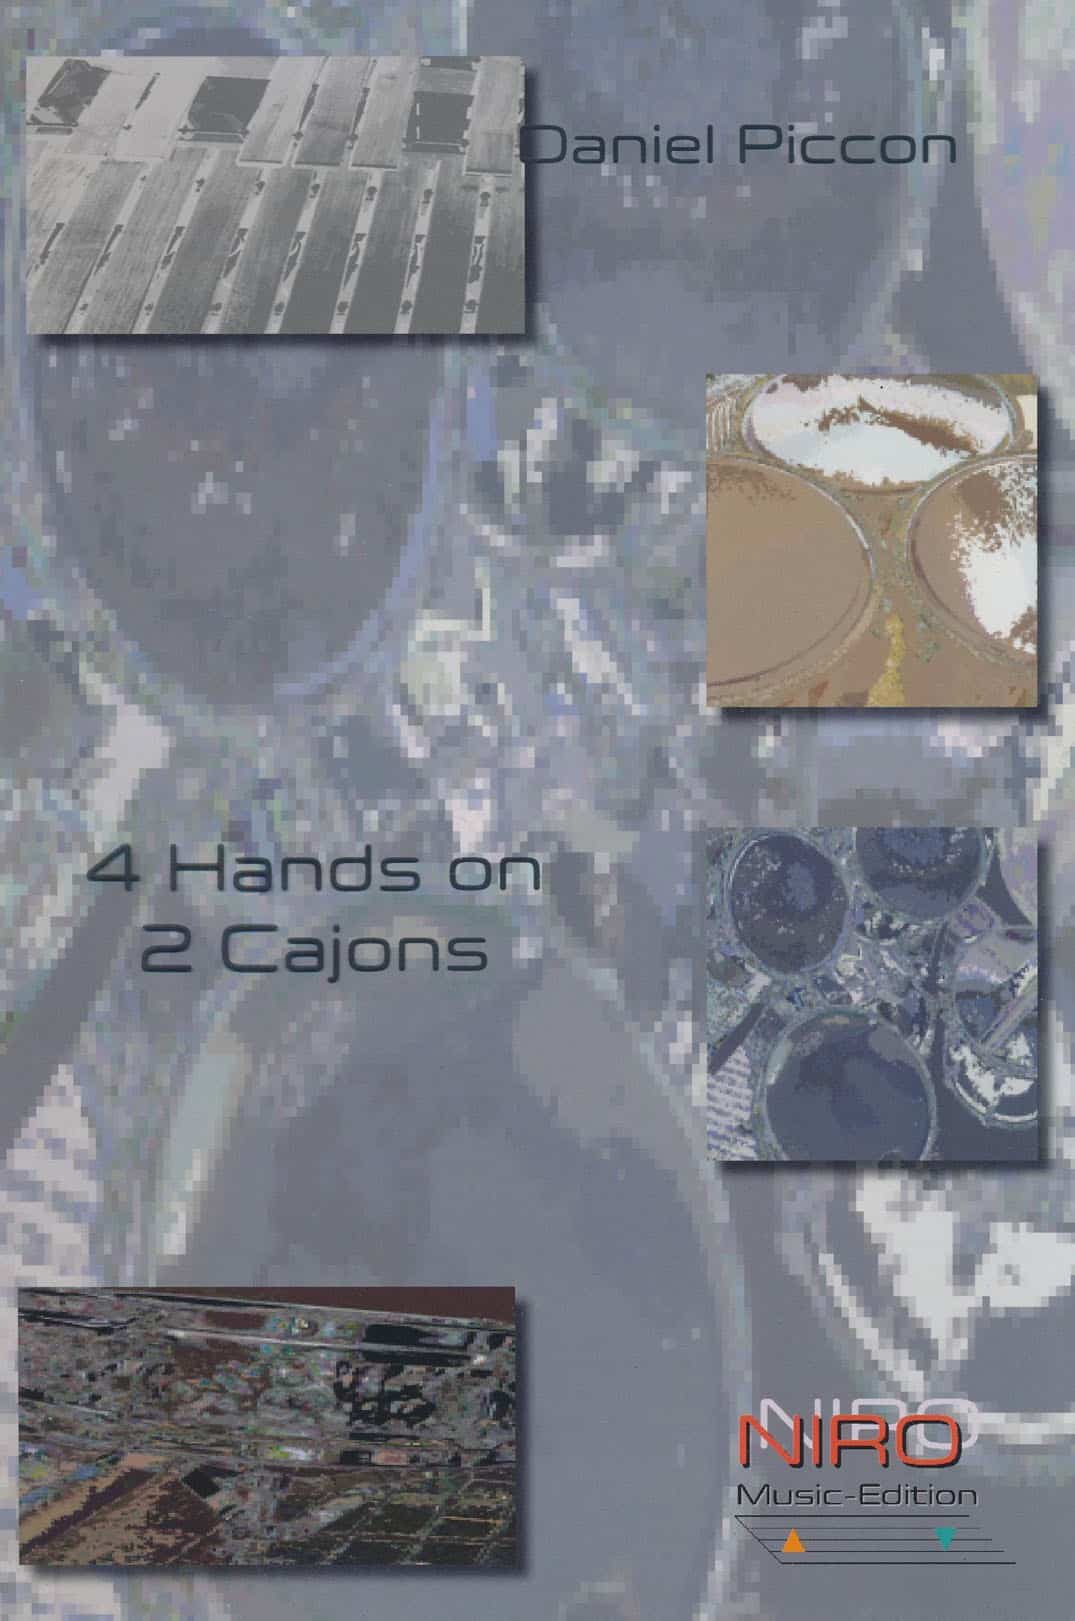 4 Hands on 2 Cajons by Daniel Piccon